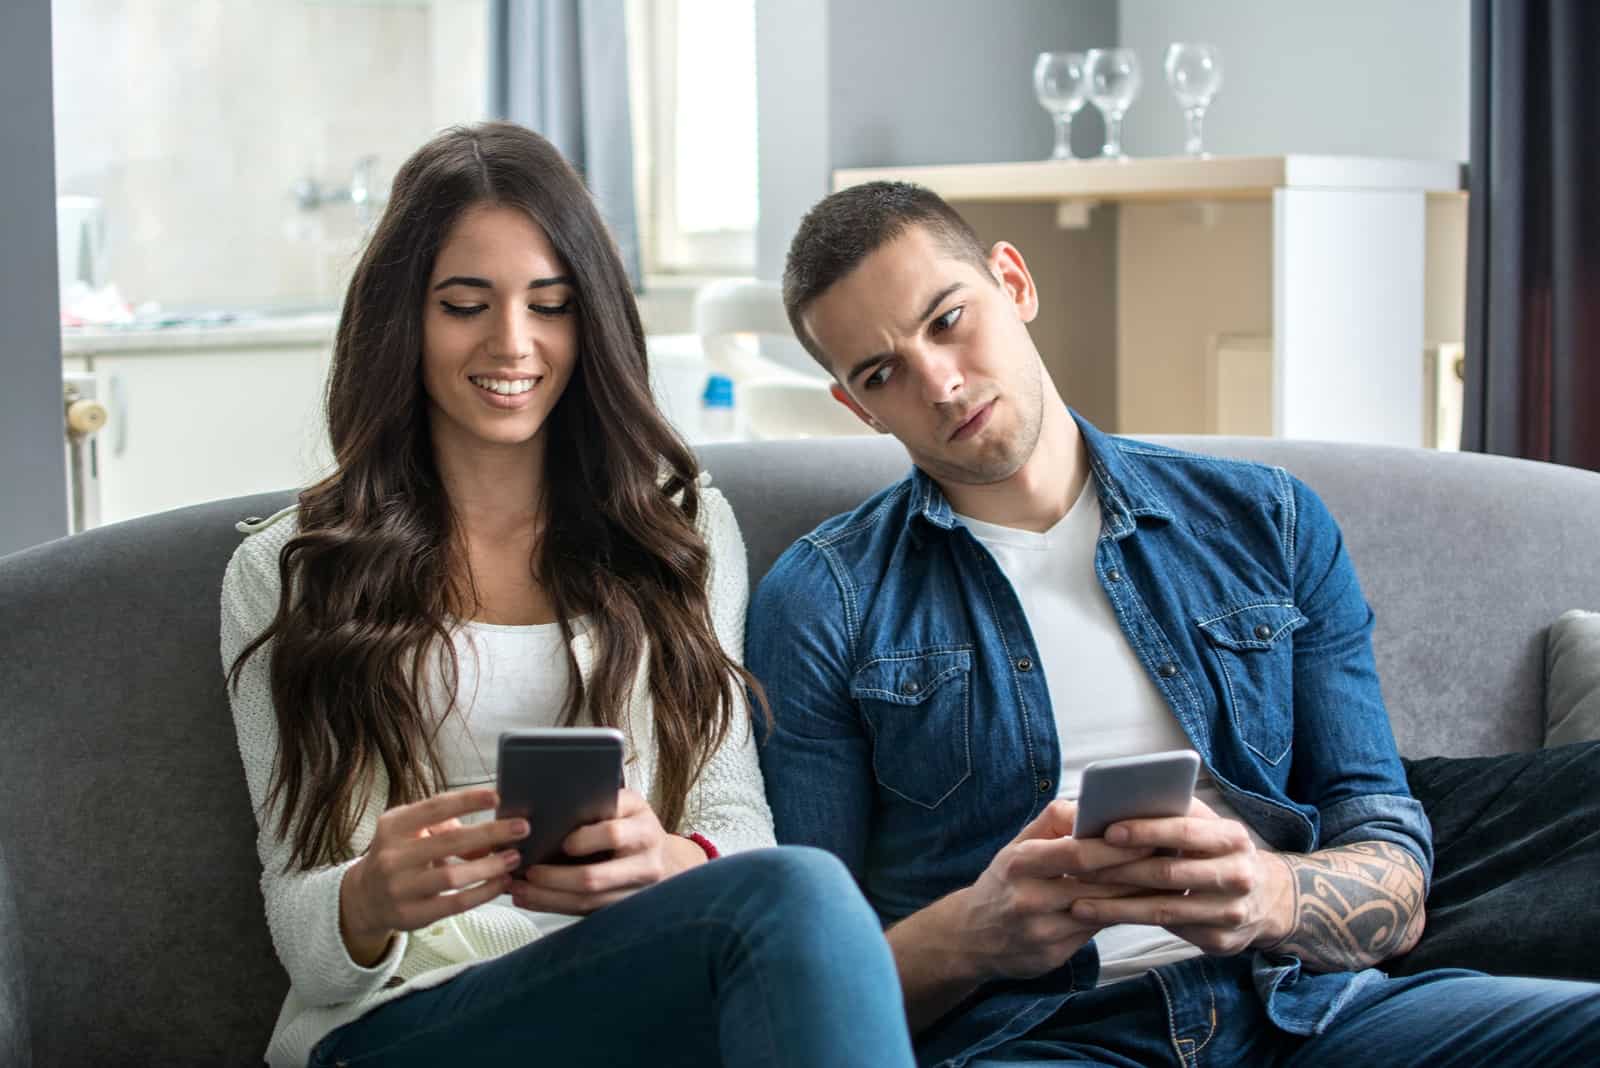 man looking at woman's smartphone while sitting on sofa